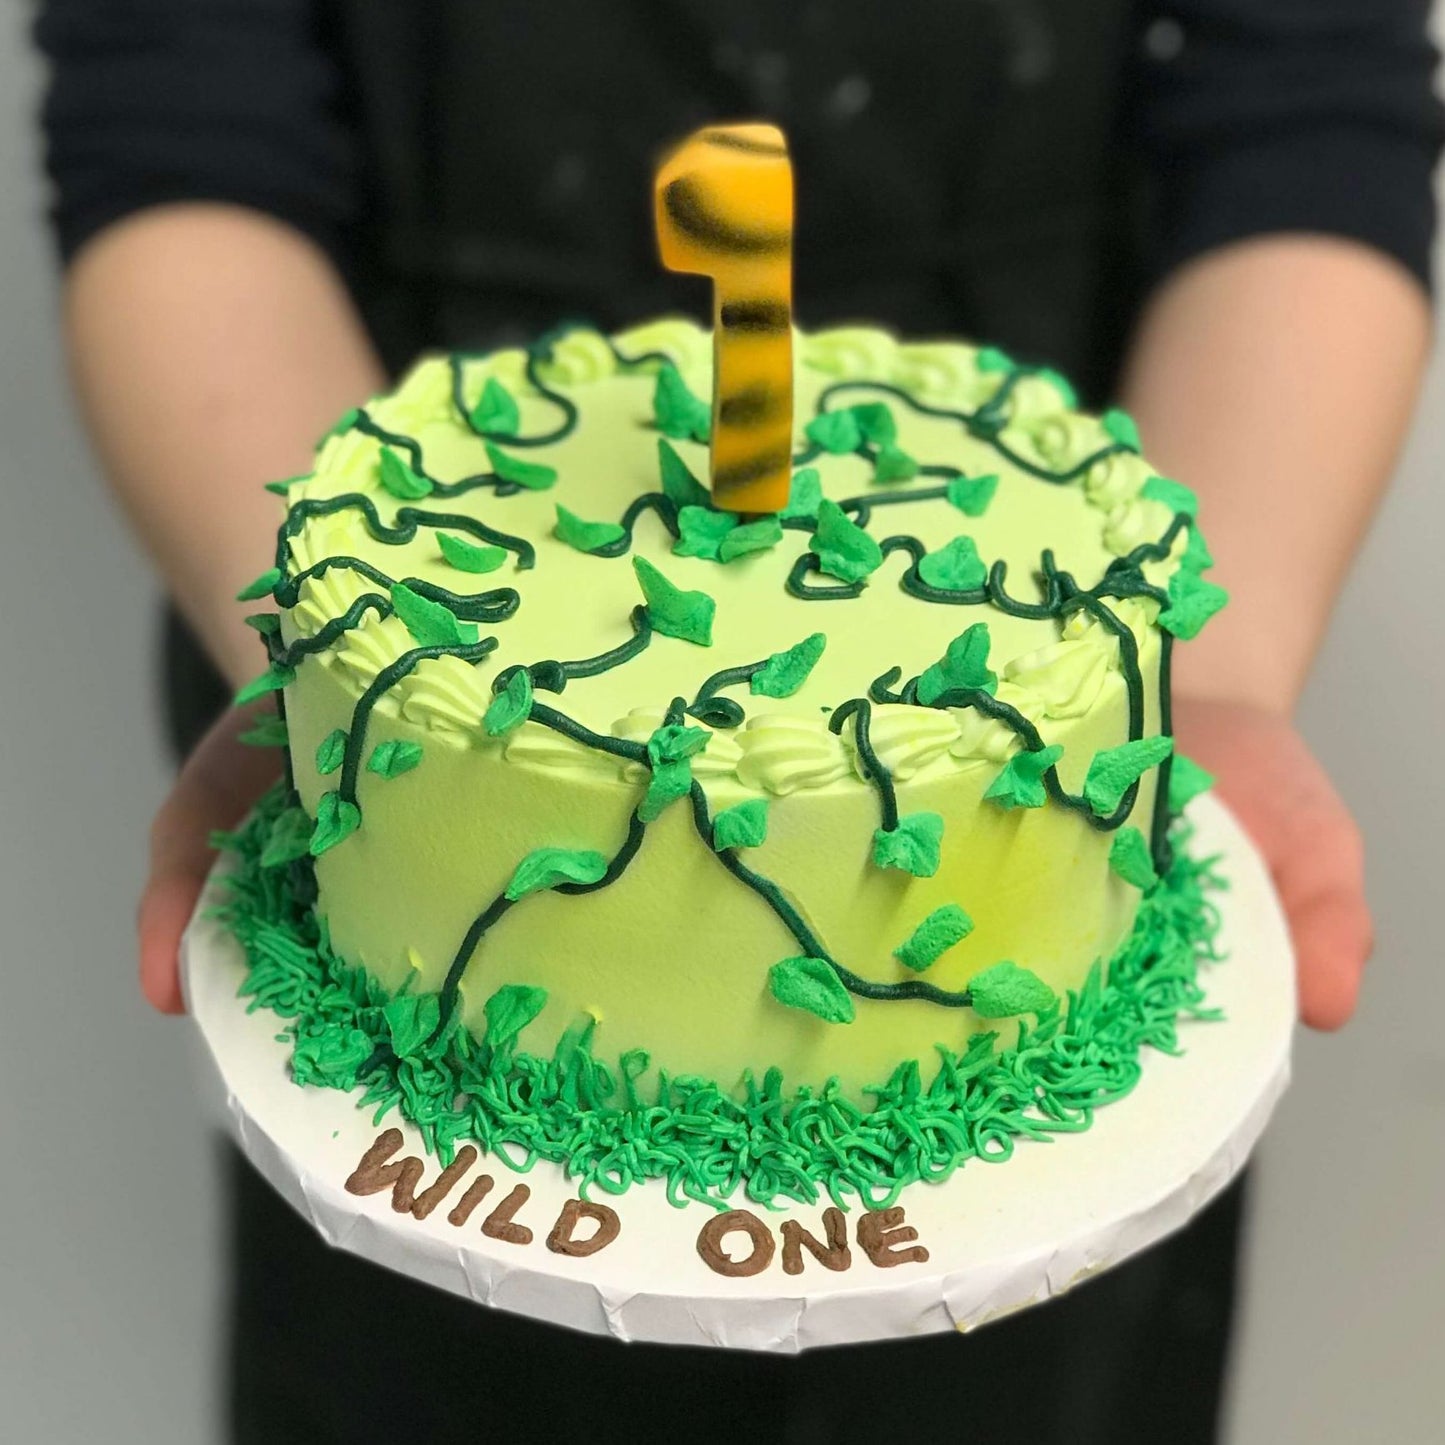 Birthday cake with vines on cake and a tiger number